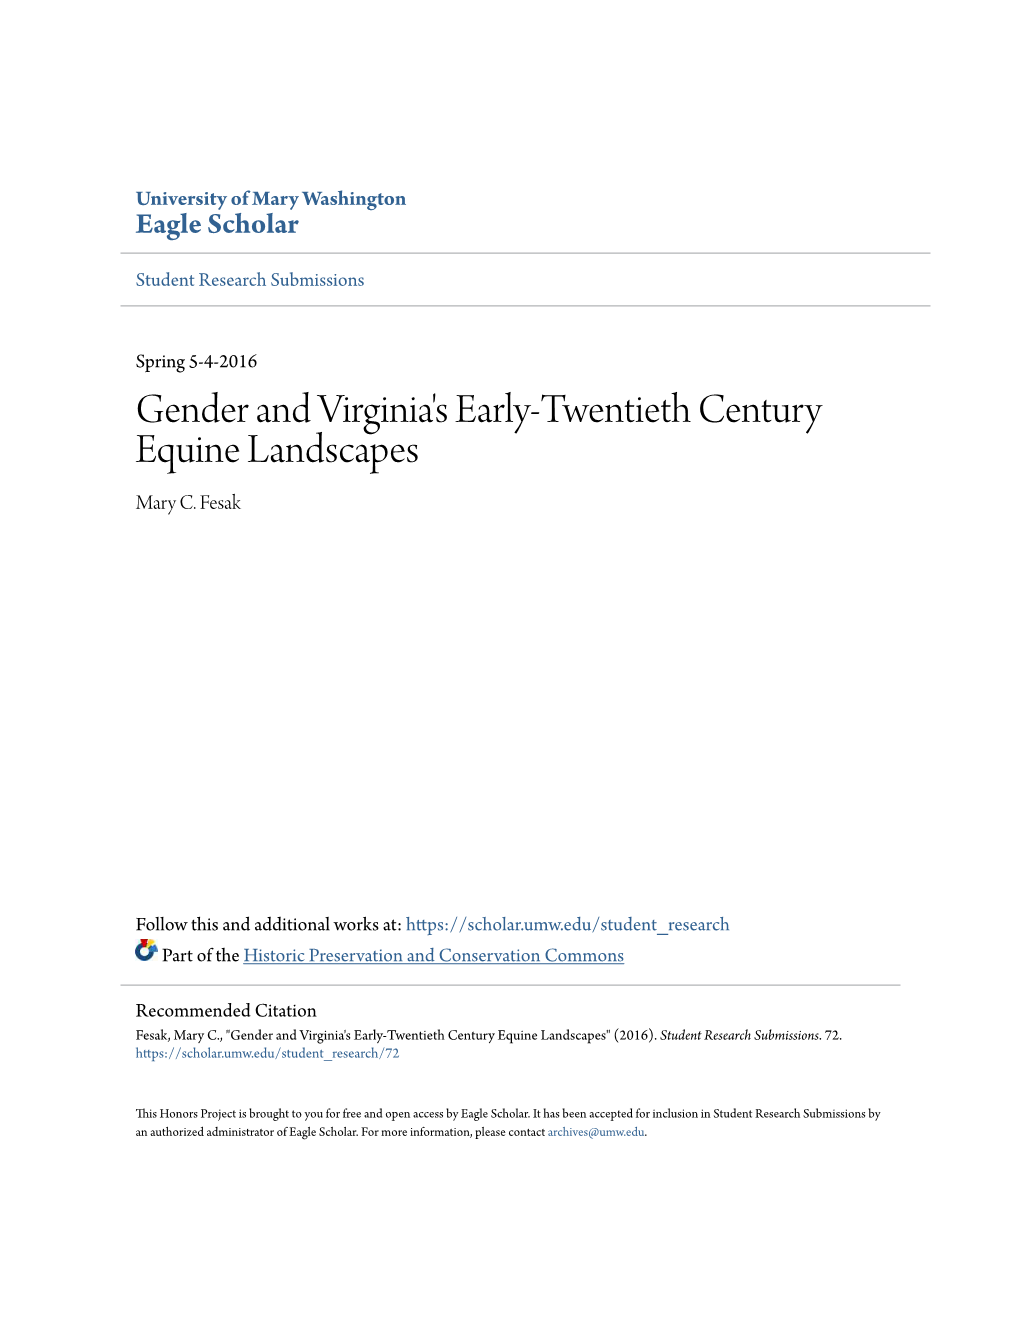 Gender and Virginia's Early-Twentieth Century Equine Landscapes Mary C